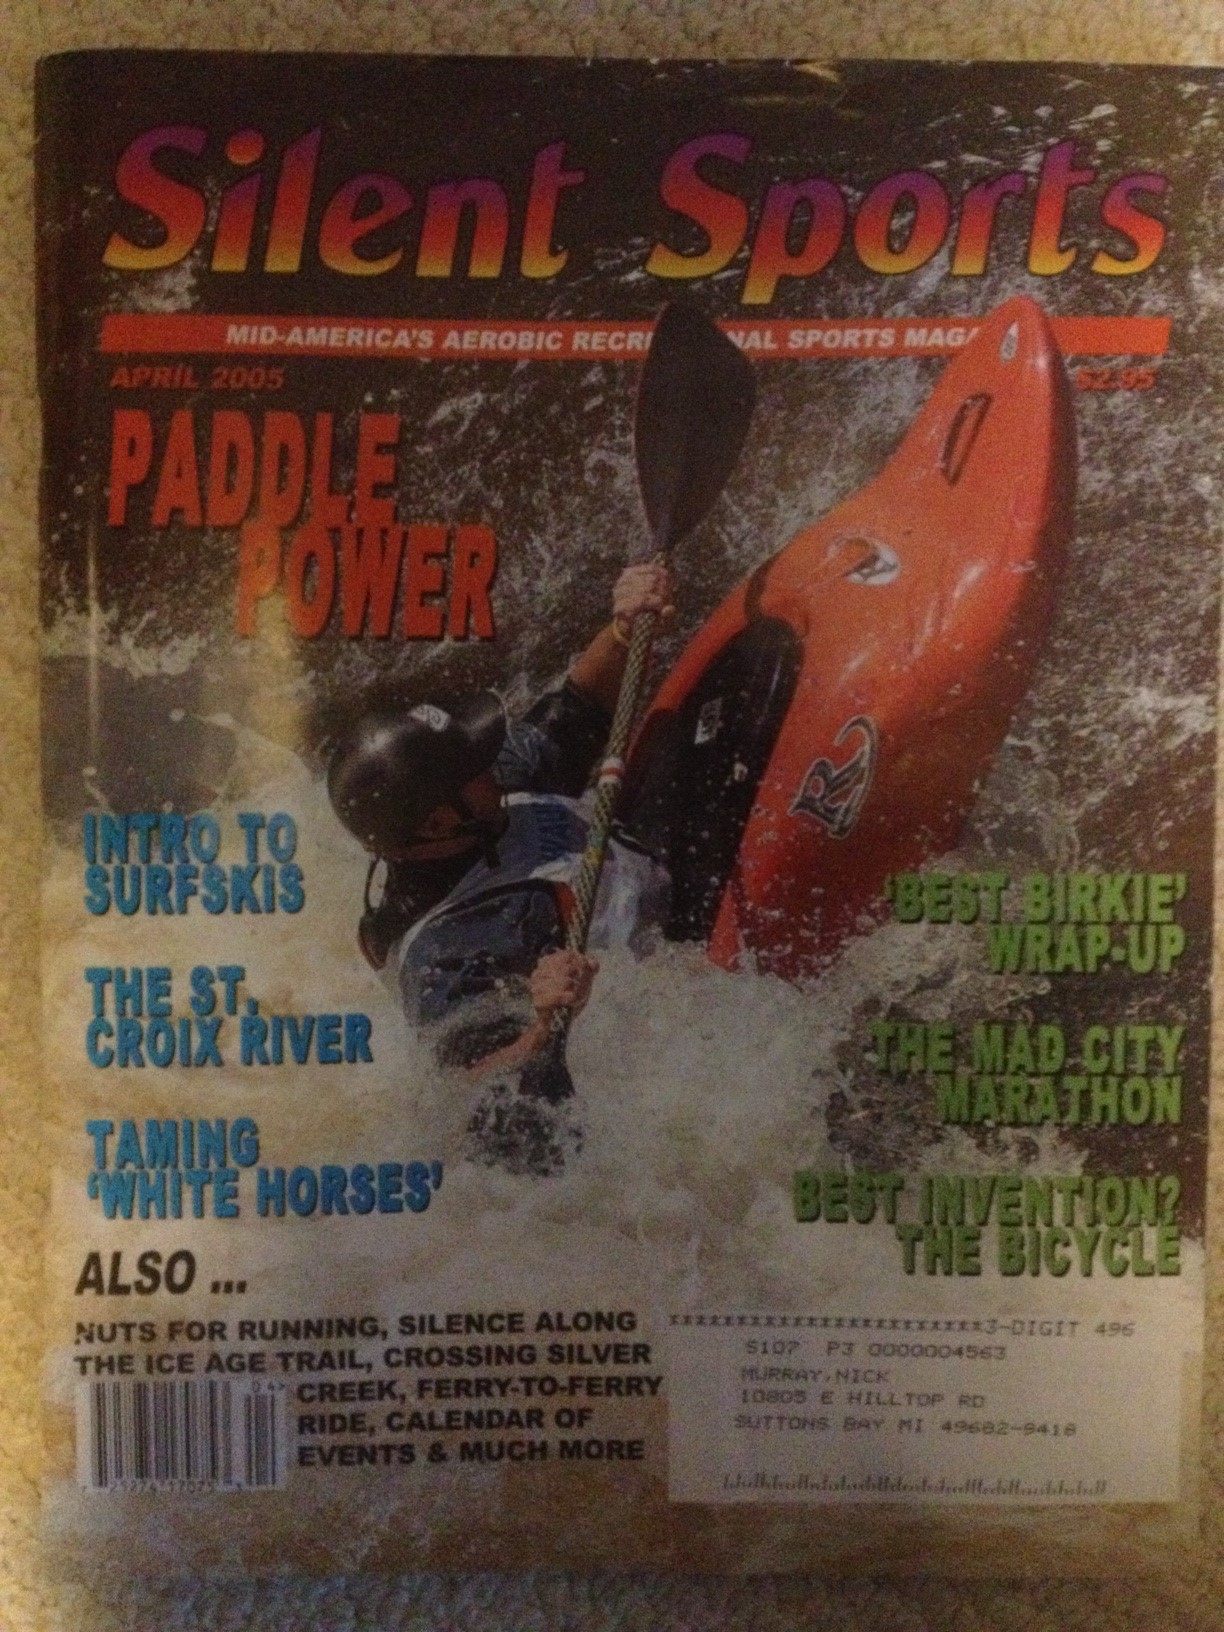 My Introduction to Surfski Paddling: Comical, Inspiring, and Fortuitous